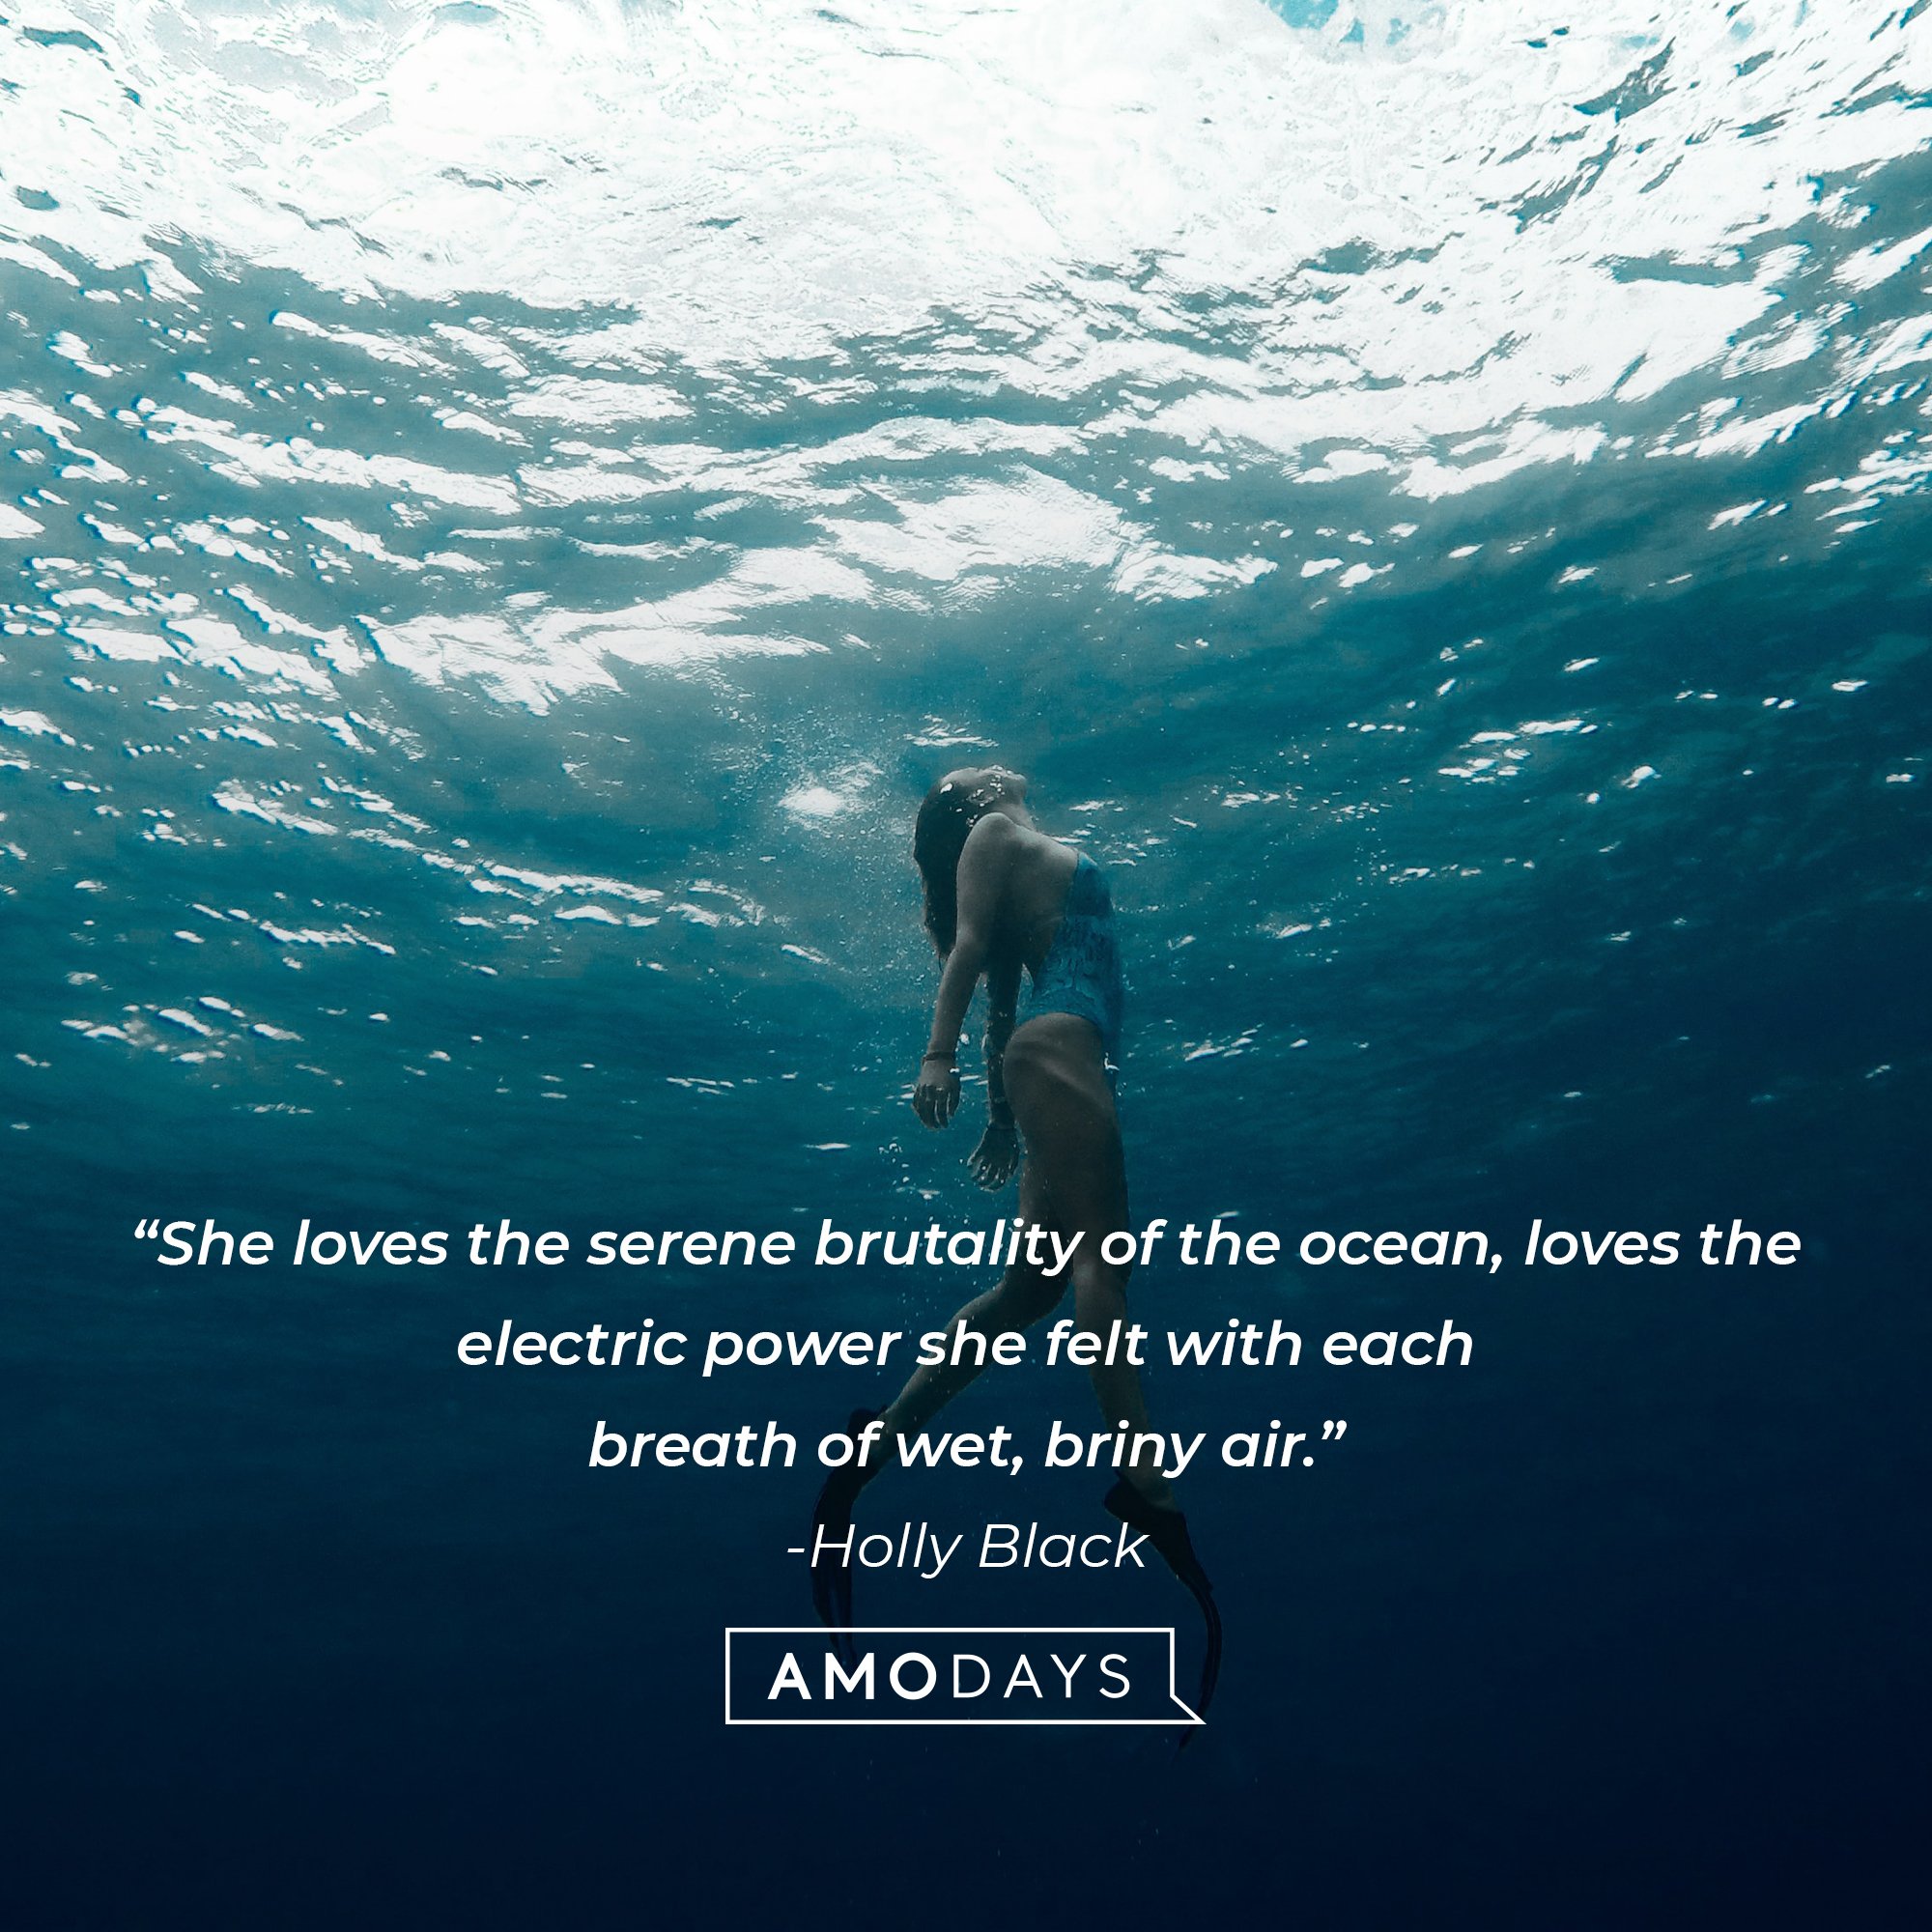 Holly Black’s quote: “She loves the serene brutality of the ocean, loves the electric power she felt with each breath of wet, briny air.” | Image: AmoDays